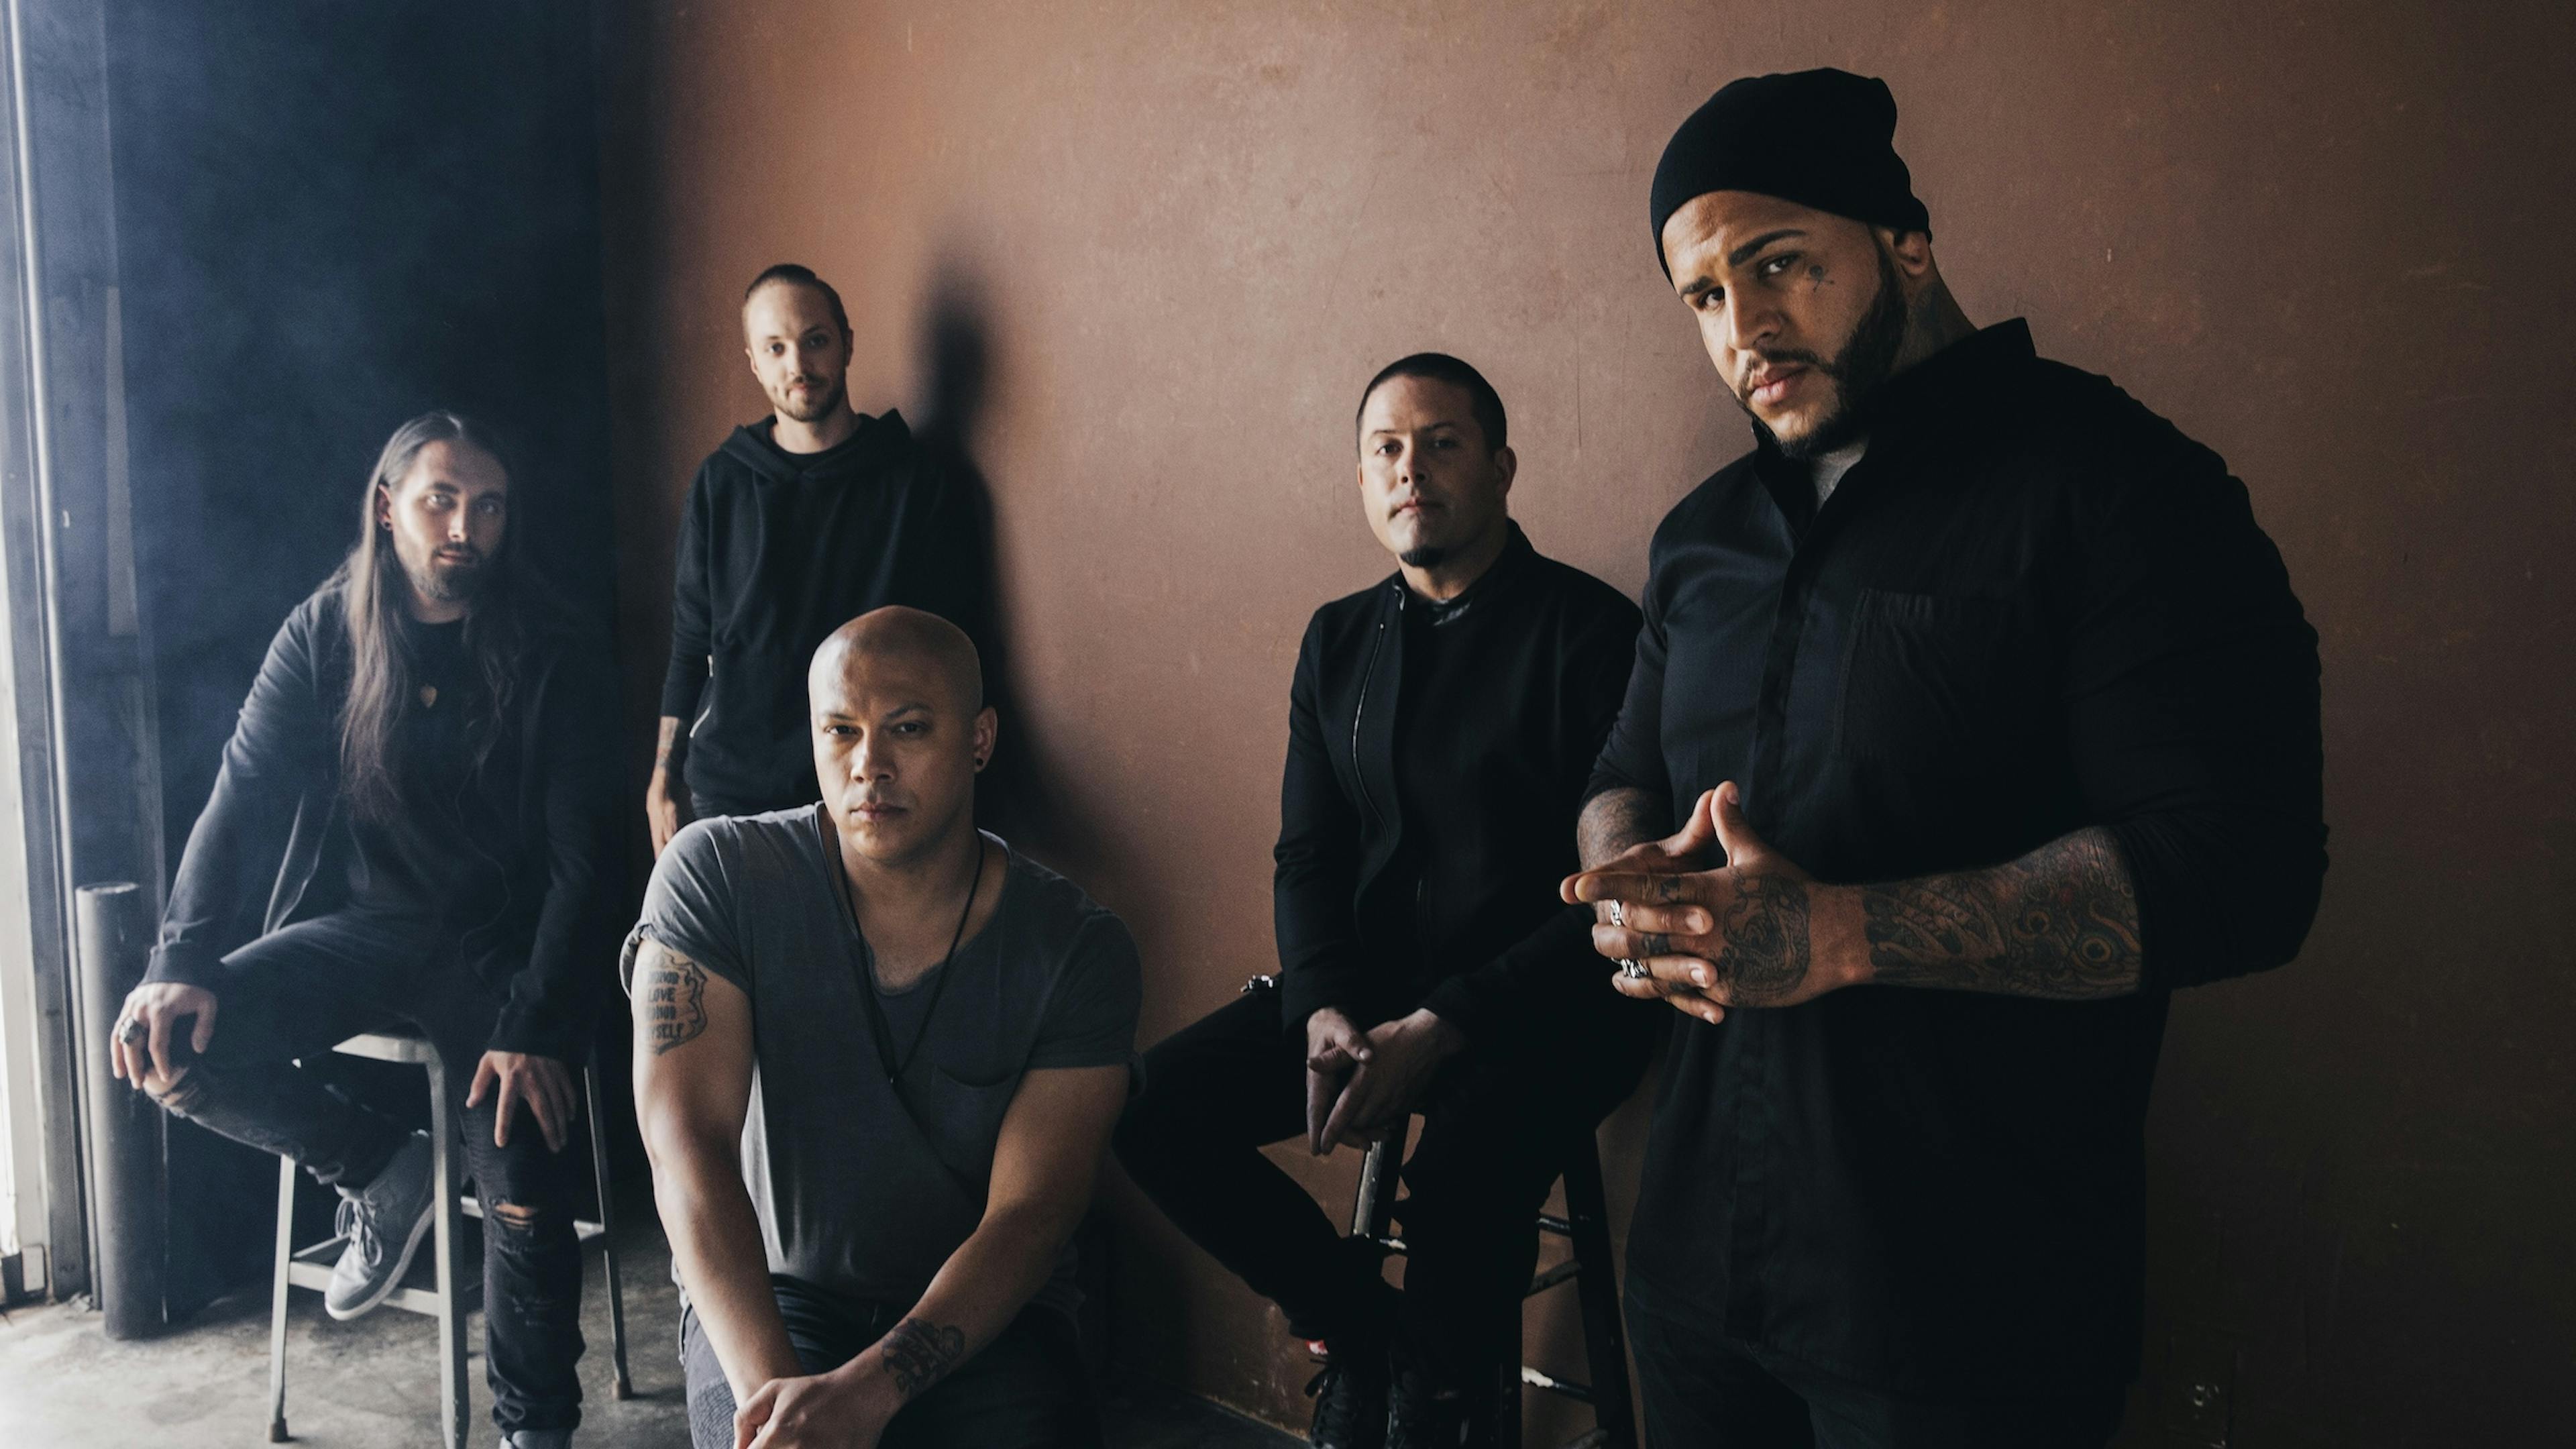 Tommy Vext Became Homeless To Tour With Bad Wolves This Year